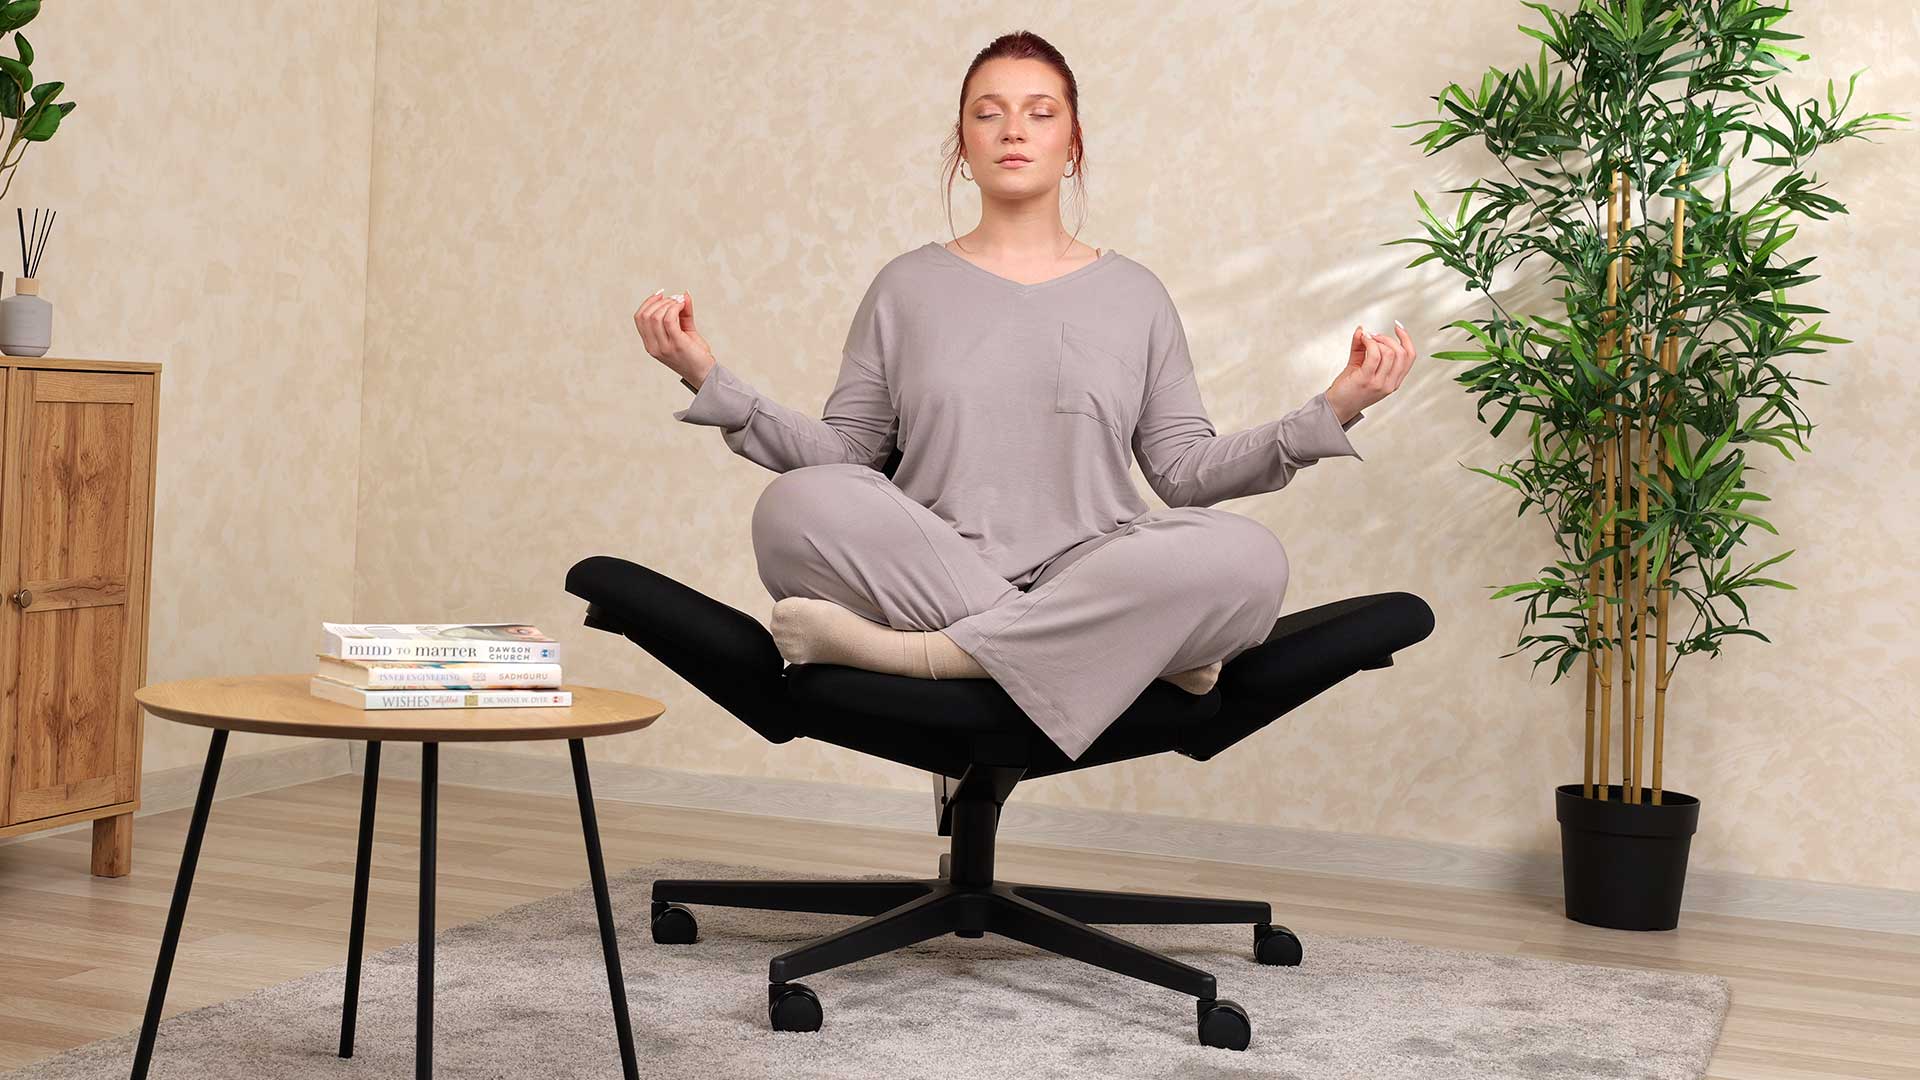 You Can Get an Office Chair That Lets You Sit Cross-Legged at Your